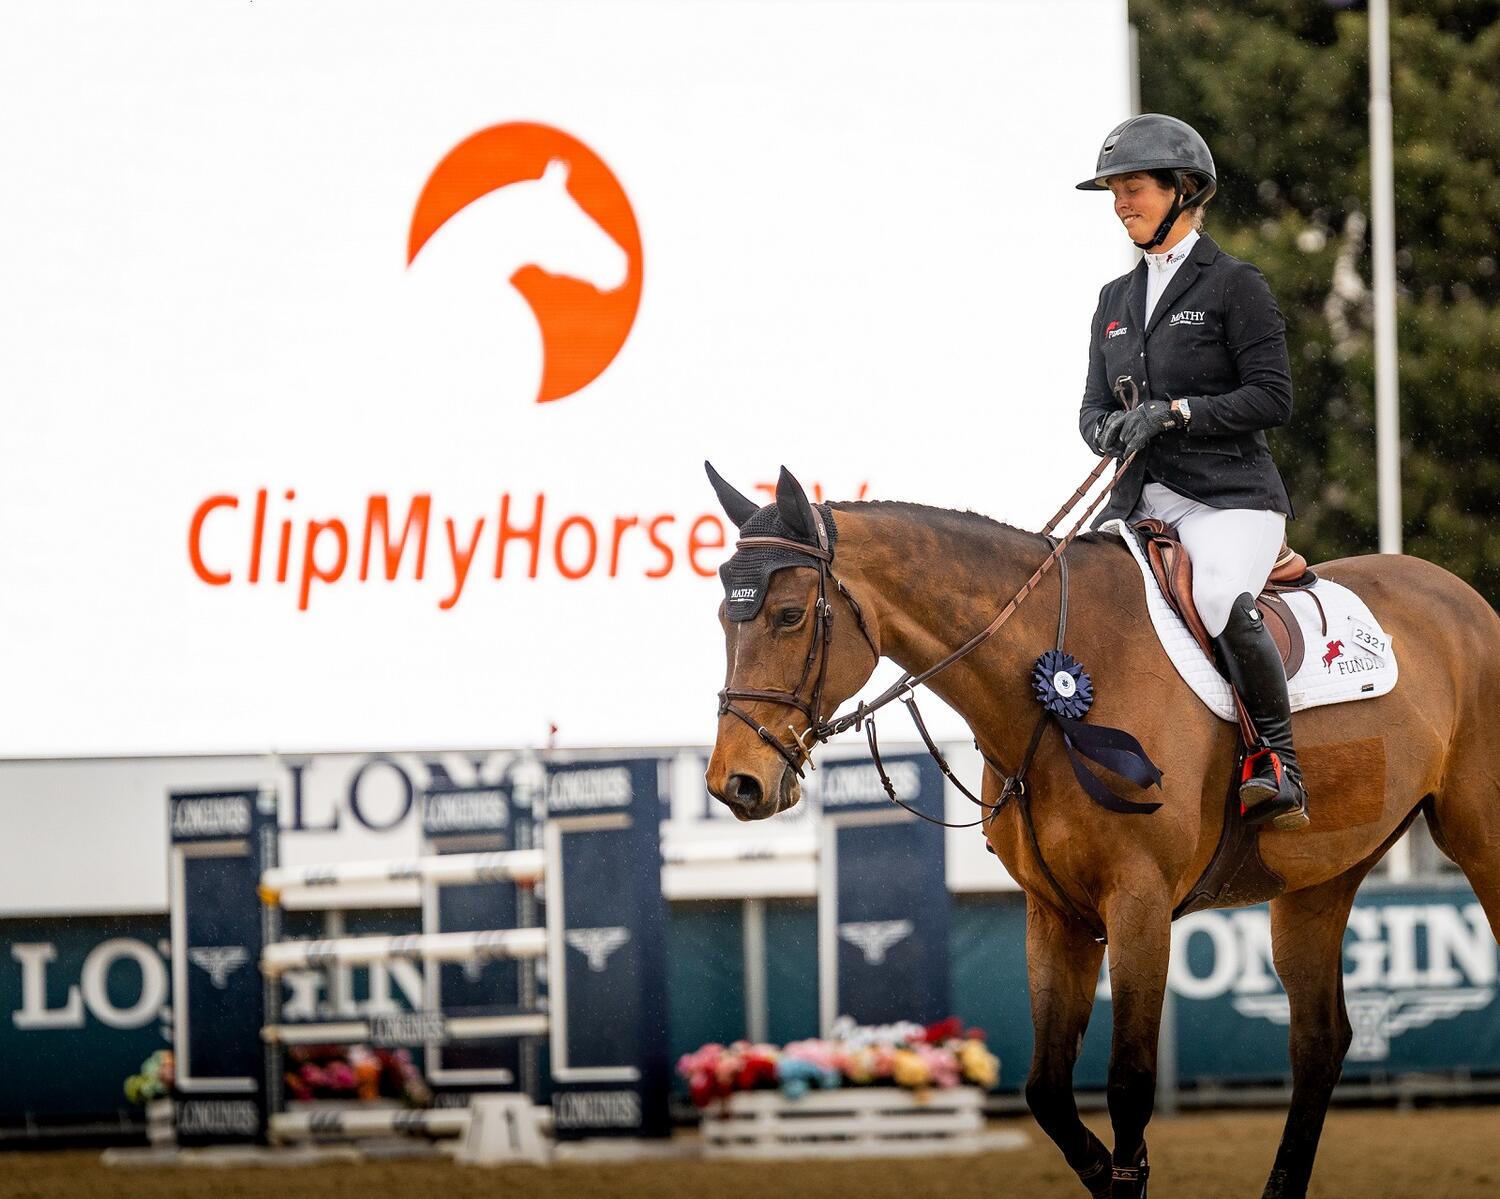 Clip My Horses Tv Charlotte Bettendorf wins the Clip My Horse.TV Longines Ranking, Grand Prix  with 'Babacool' - NOTICIA